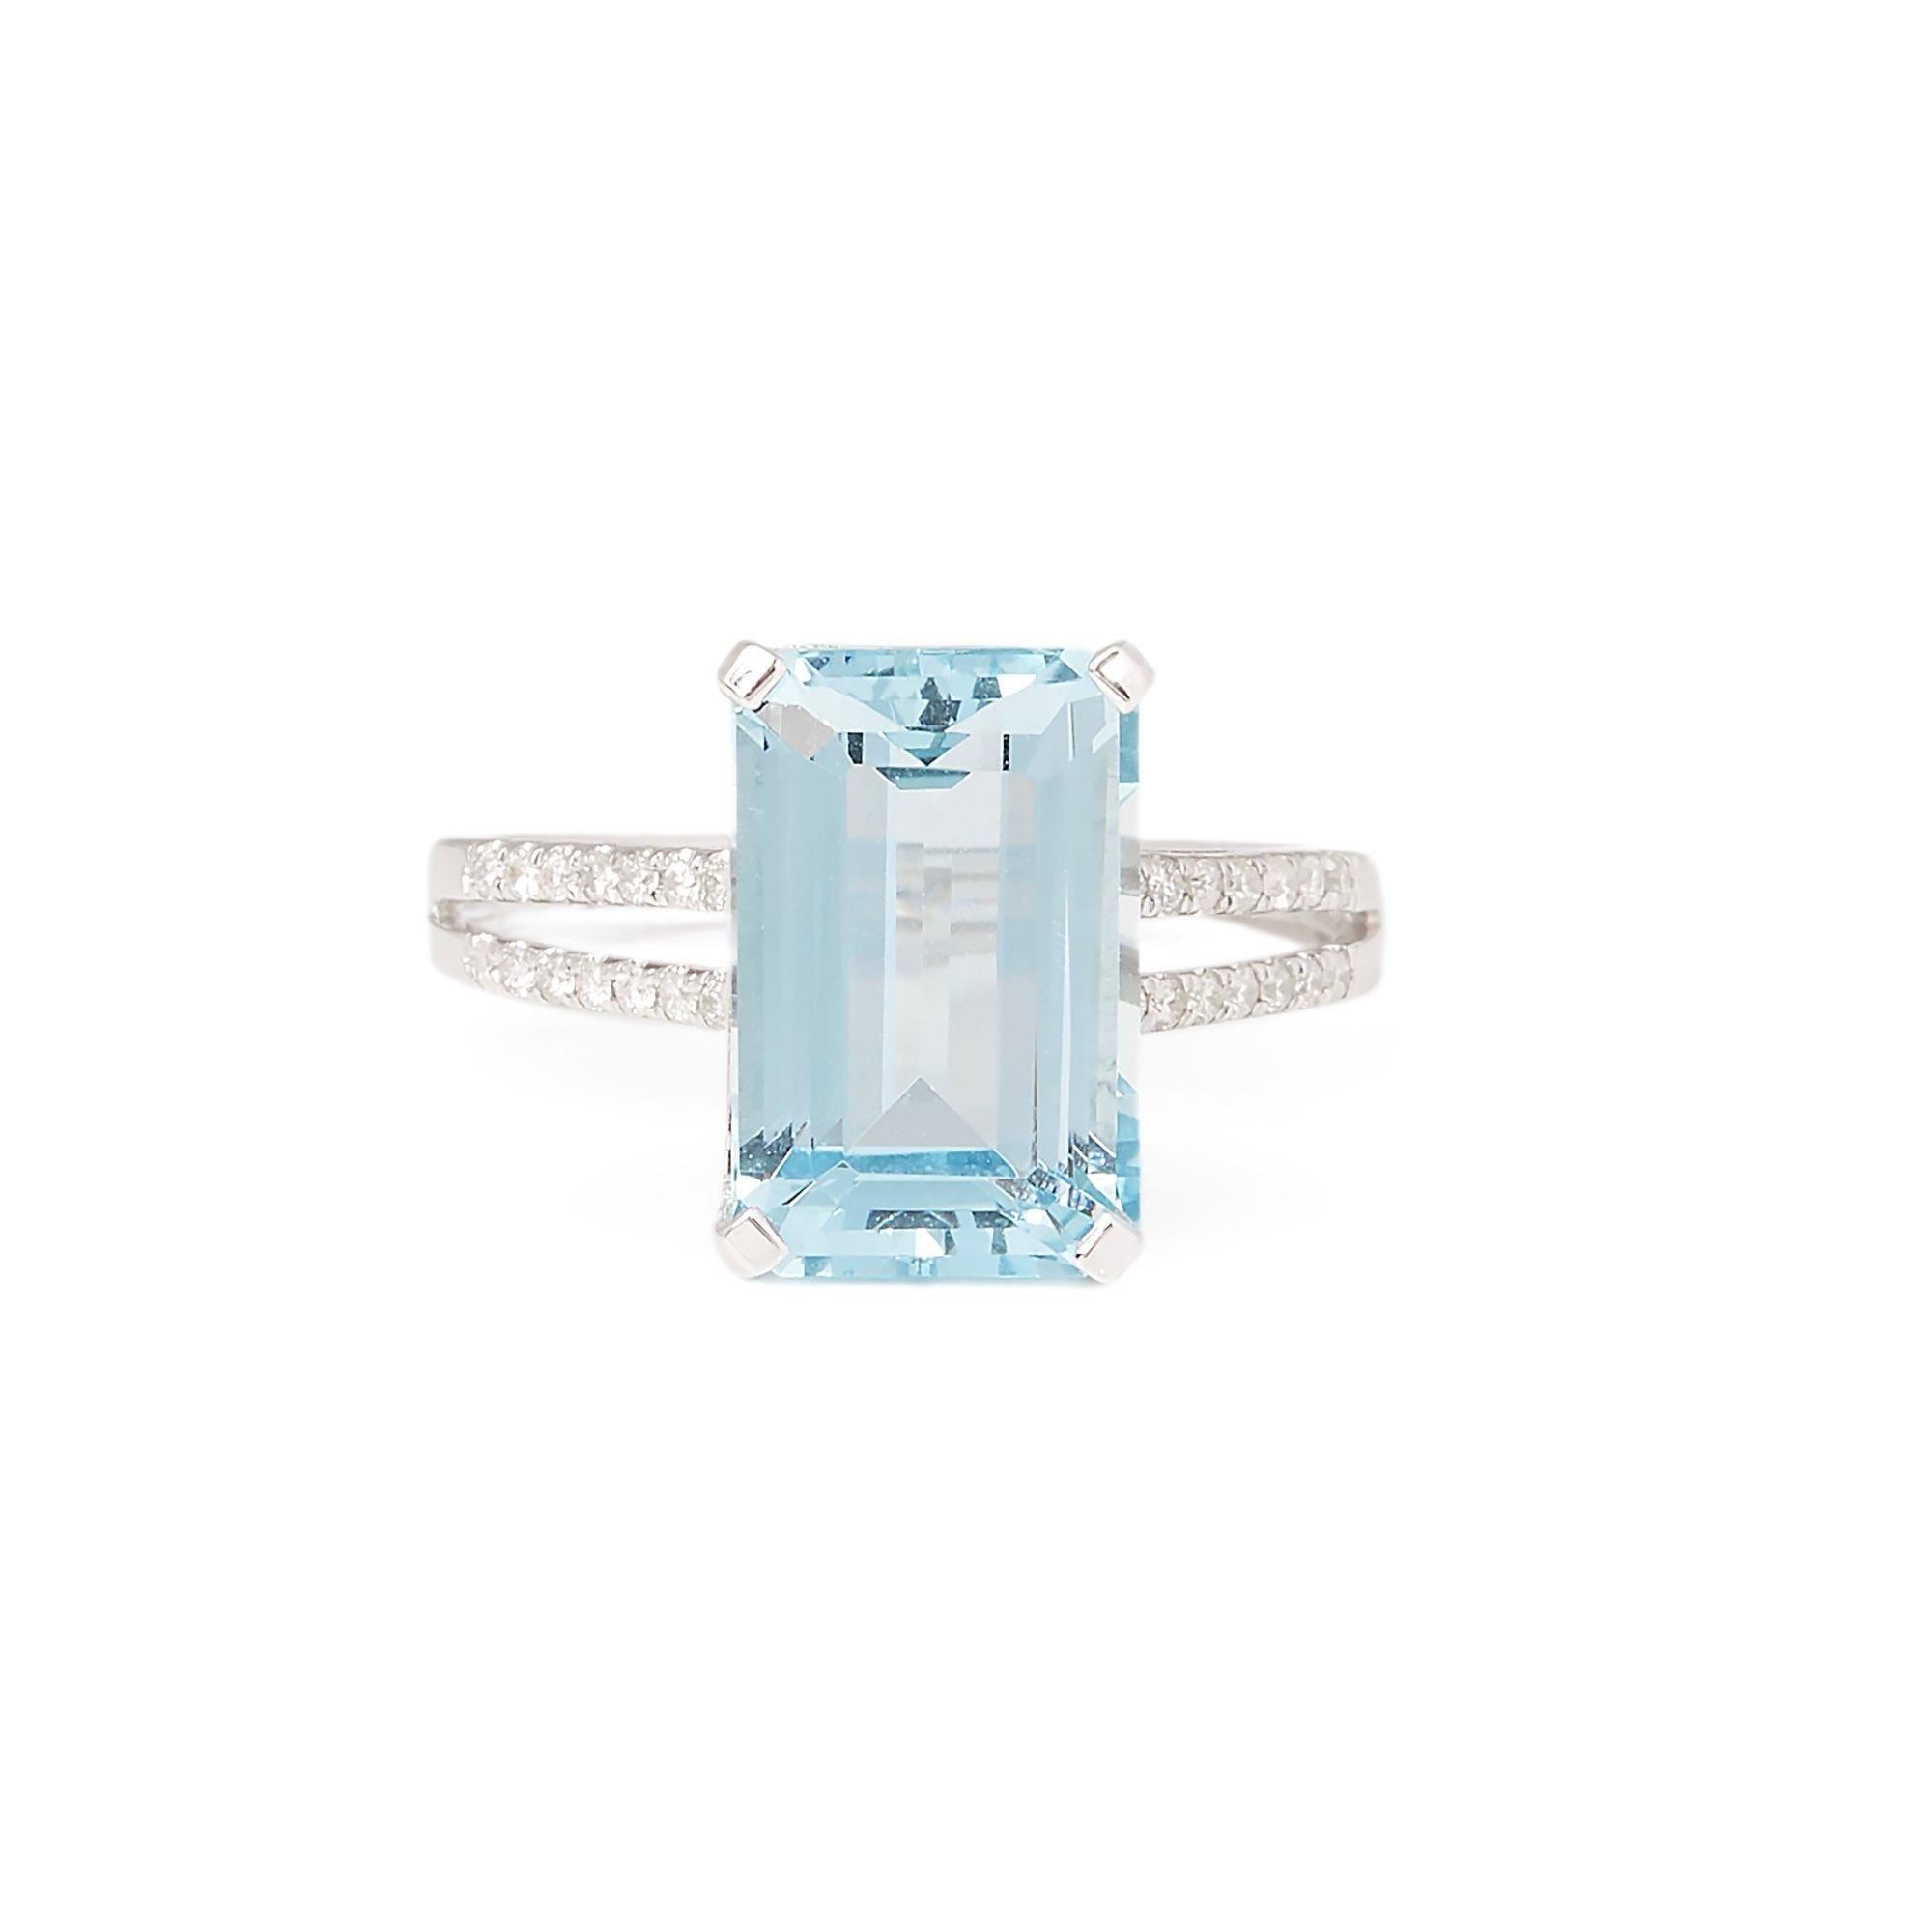 This ring designed by David Jerome is from his private collection and features one Emerald cut Aquamarine totalling 5.22cts sourced in Brazil. Set with round brilliant Cut diamonds totalling 0.20cts mounted in an 18k white gold setting. UK finger